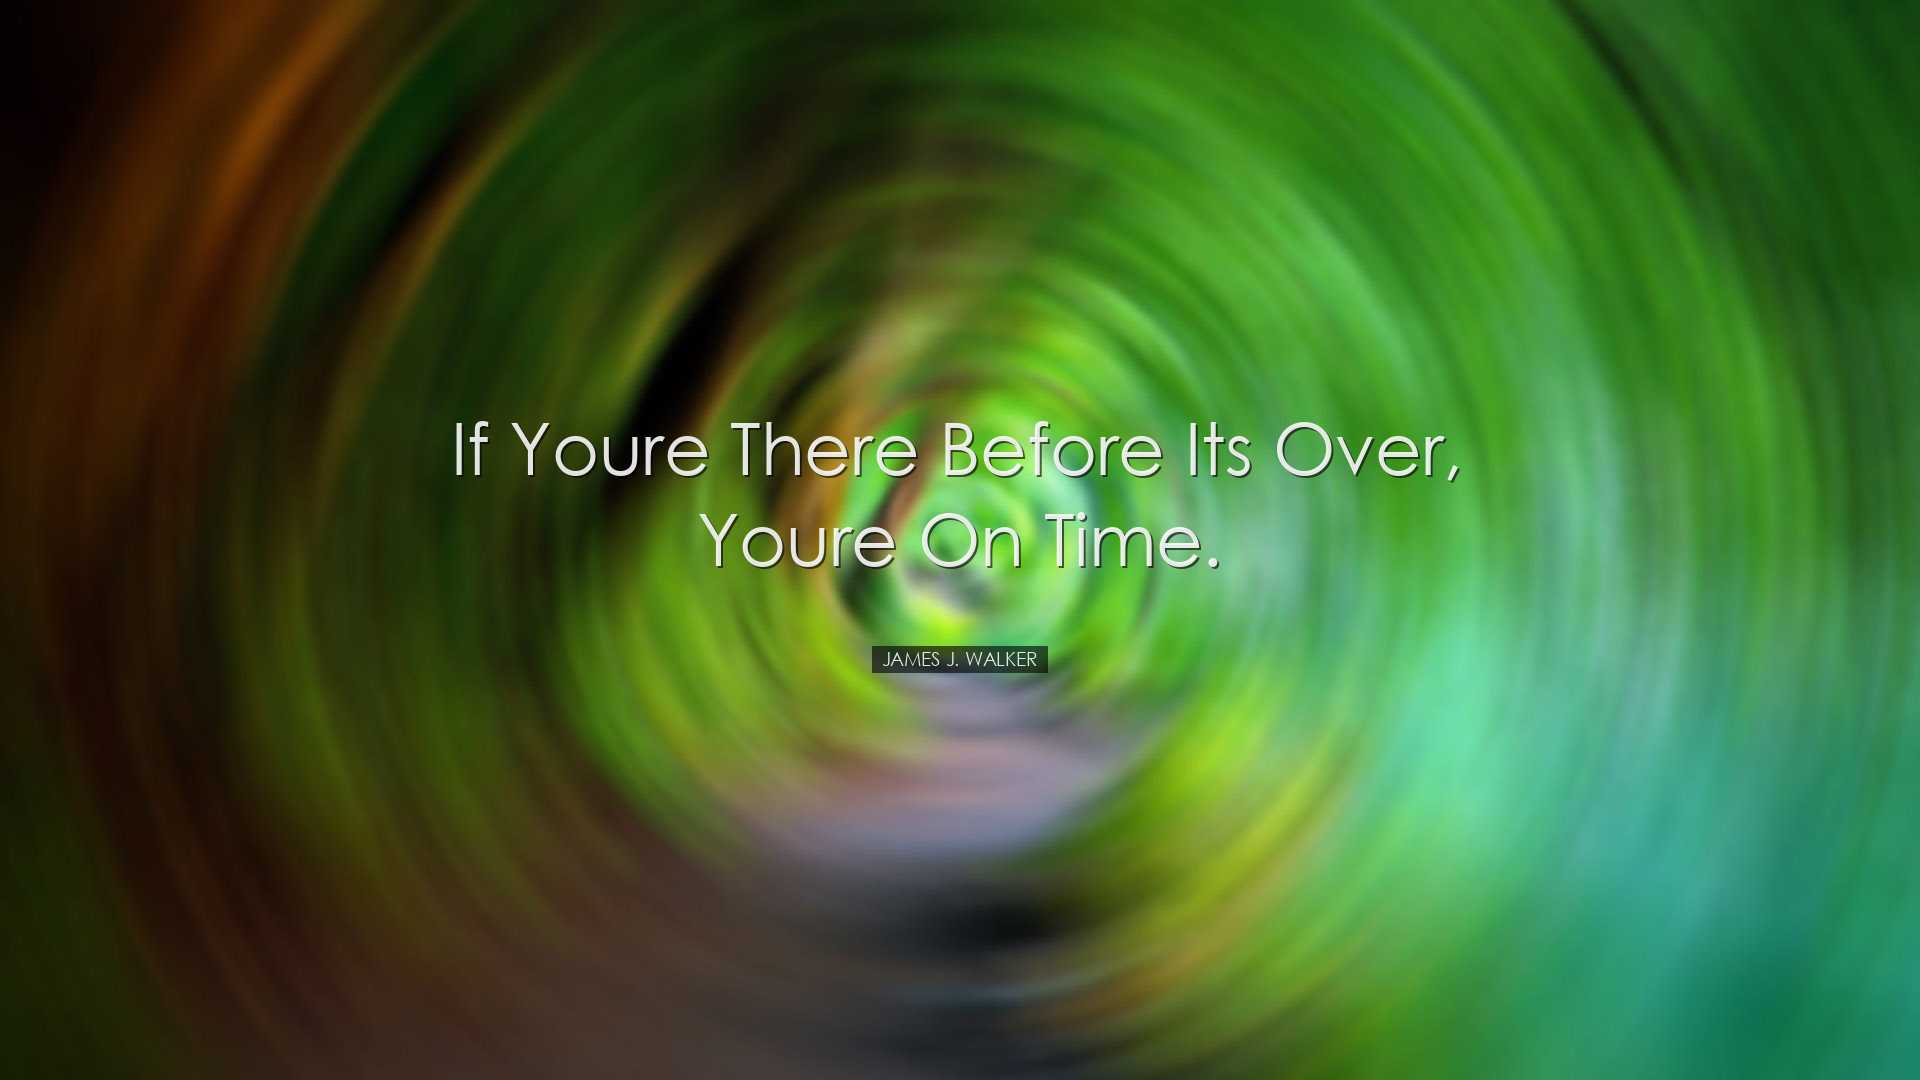 If youre there before its over, youre on time. - James J. Walker